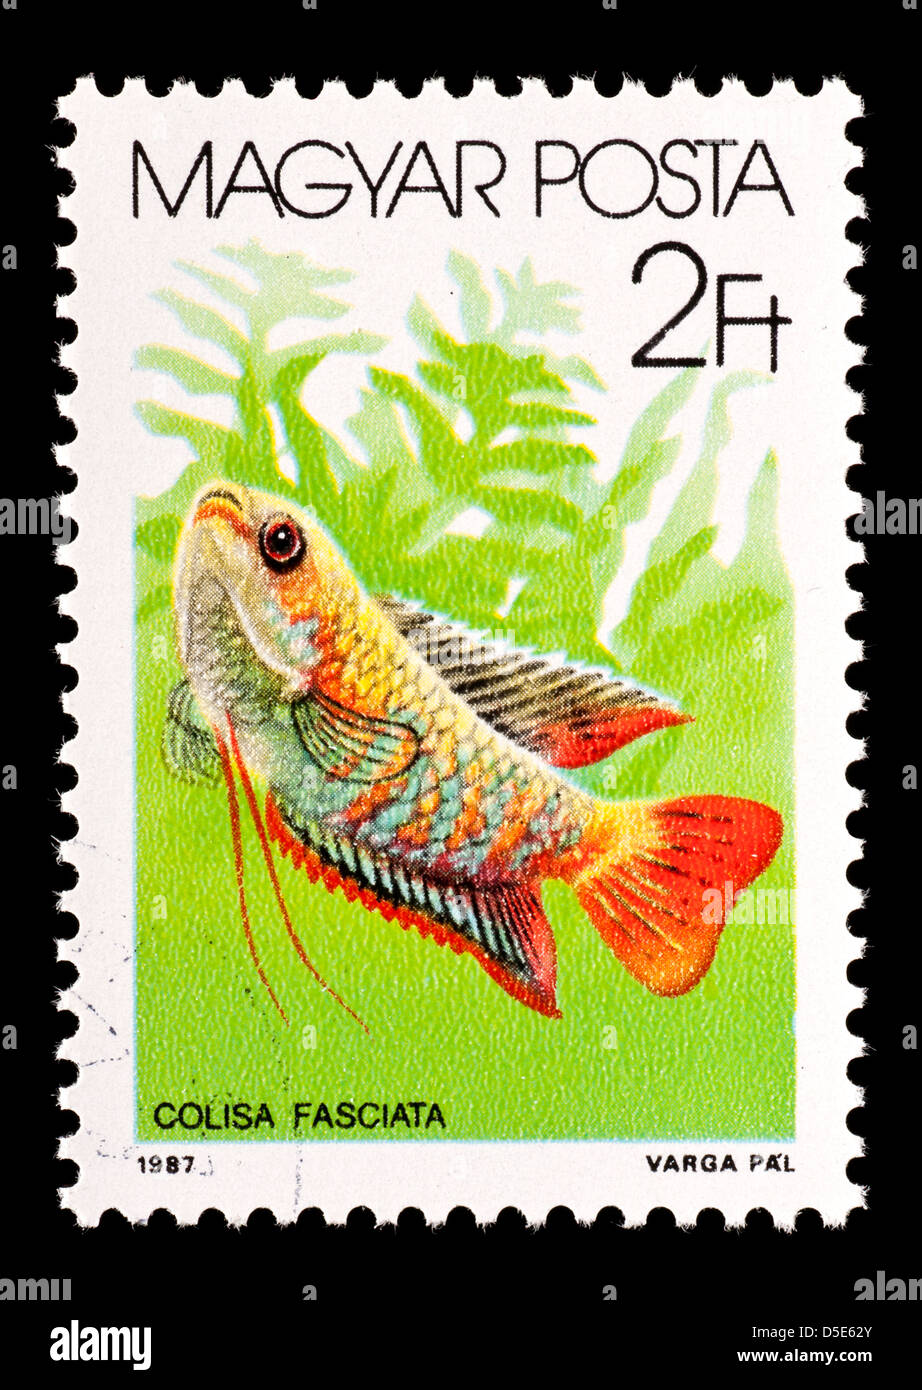 Postage stamp from Hungary depicting a male tropical Banded Gourami (Colisa fasciata) Stock Photo